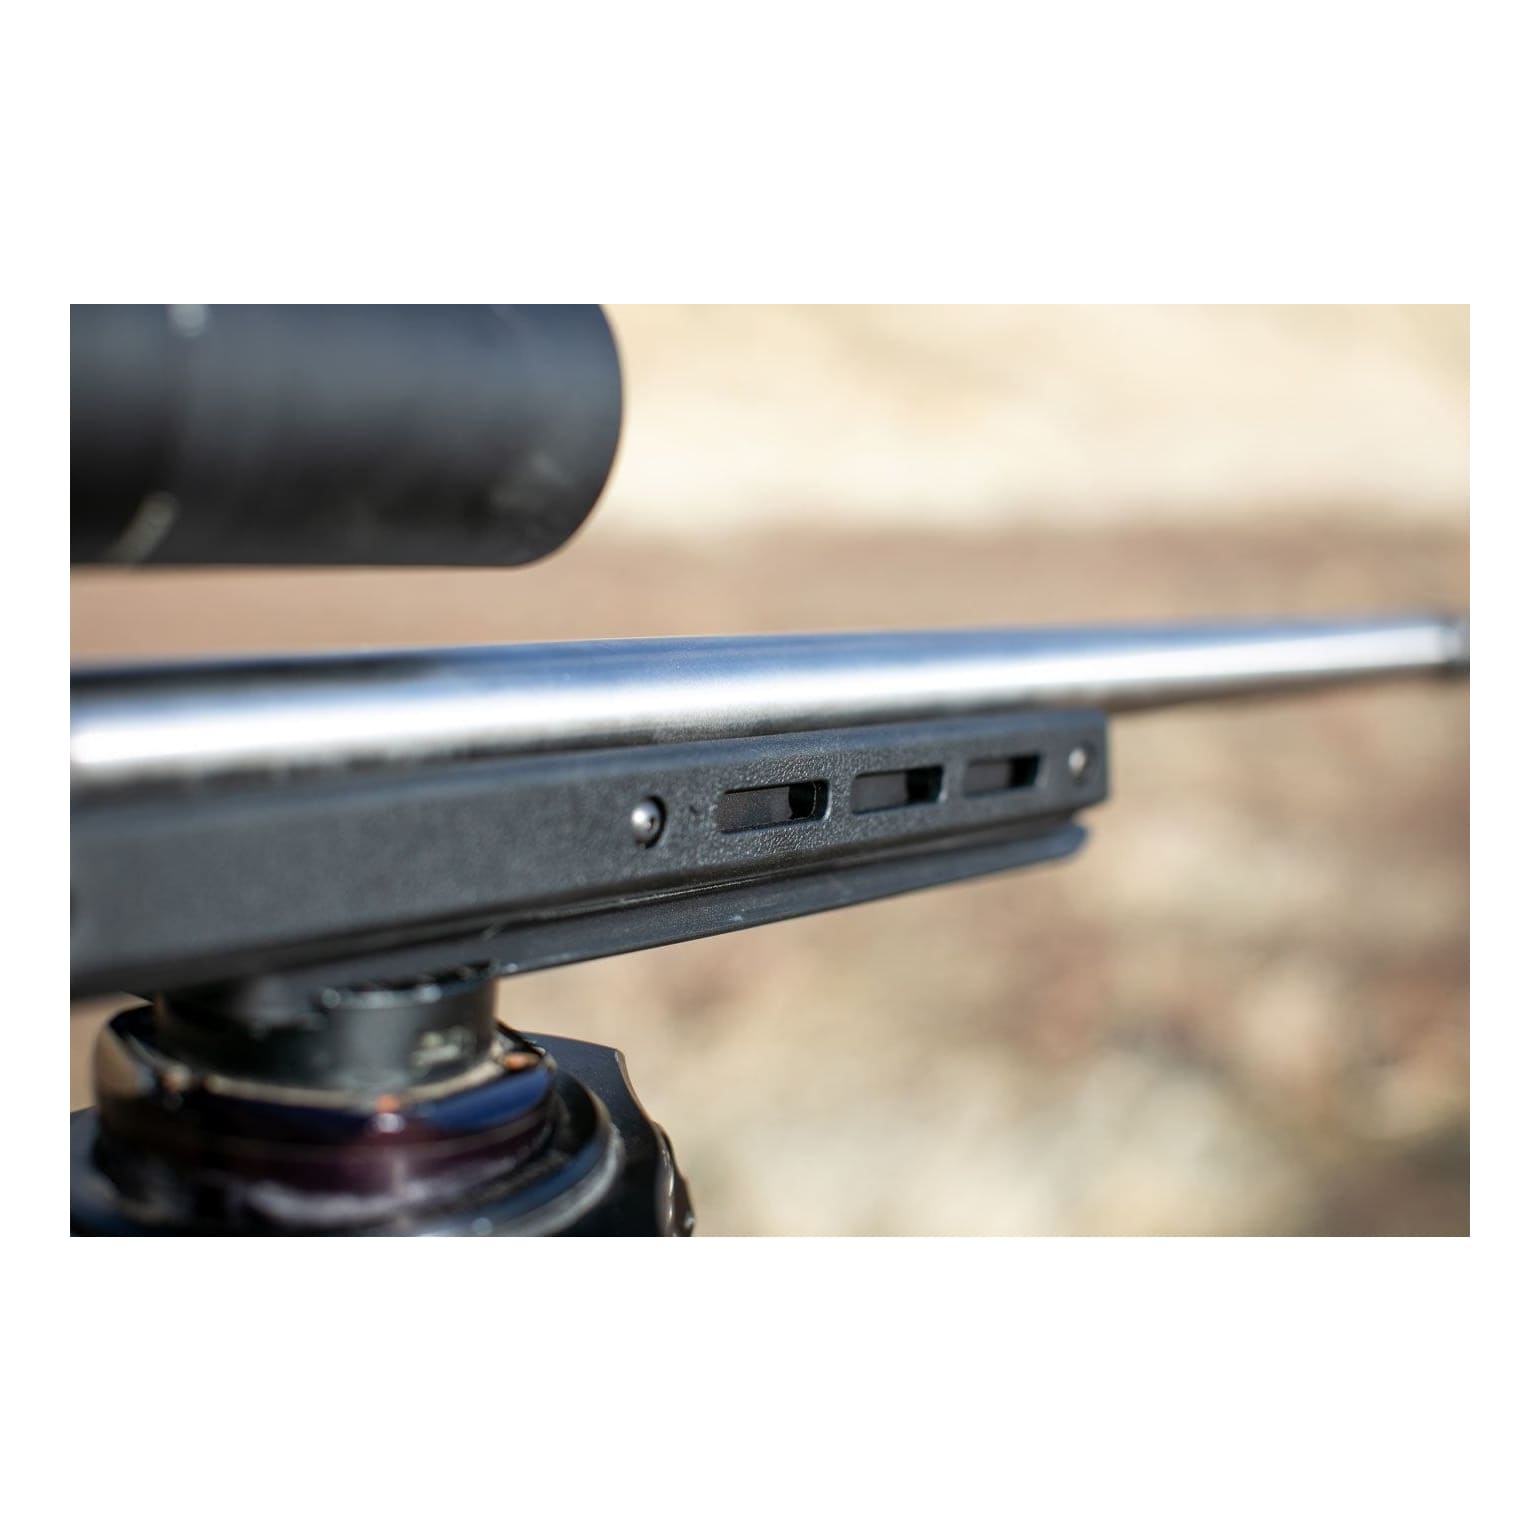 MDT® XRS Savage Short-Action Chassis System